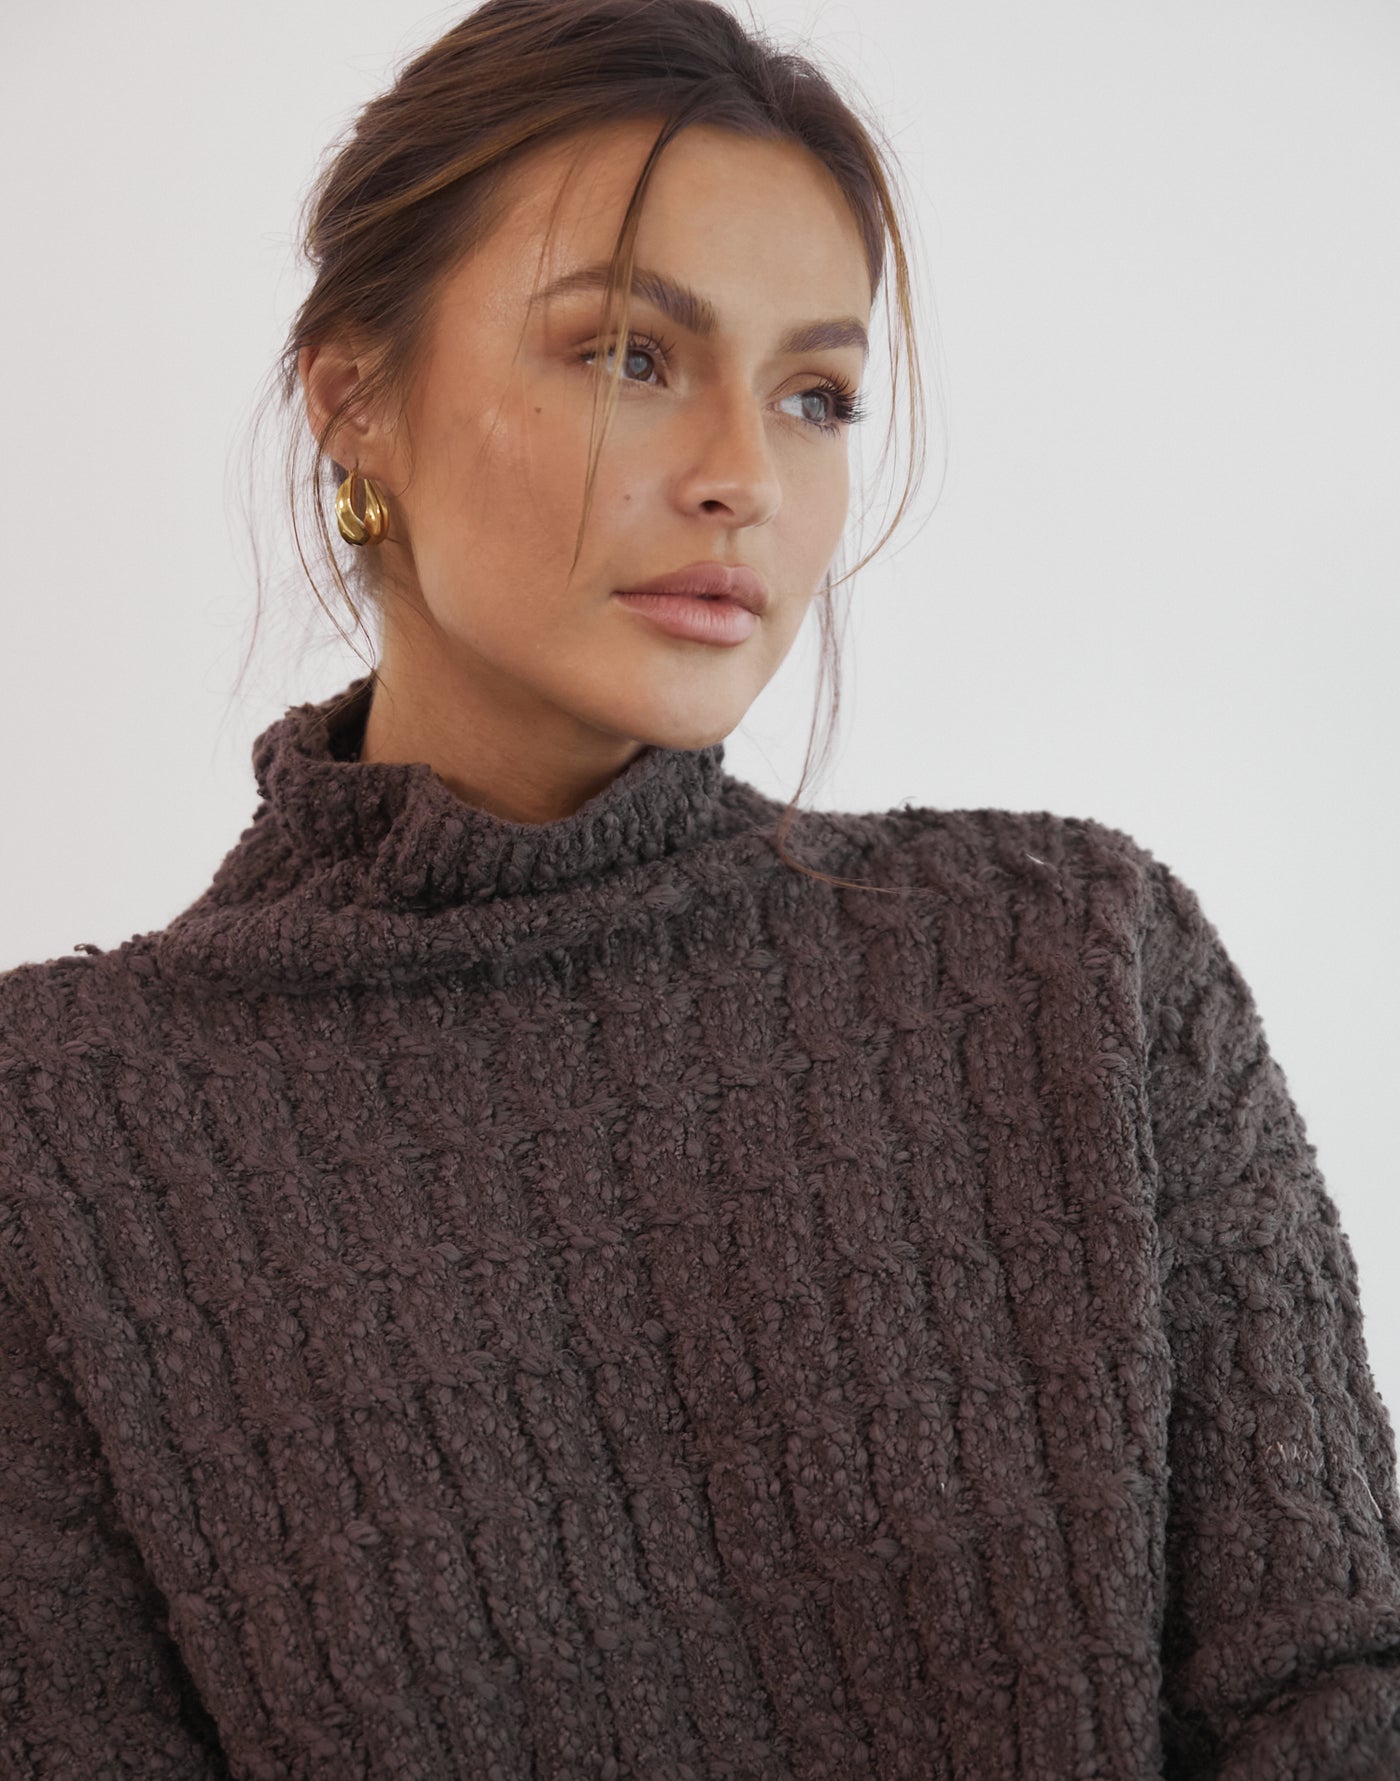 Hayes Knit Jumper (Cocoa) - High Neck Knit Jumper - Women's Top - Charcoal Clothing